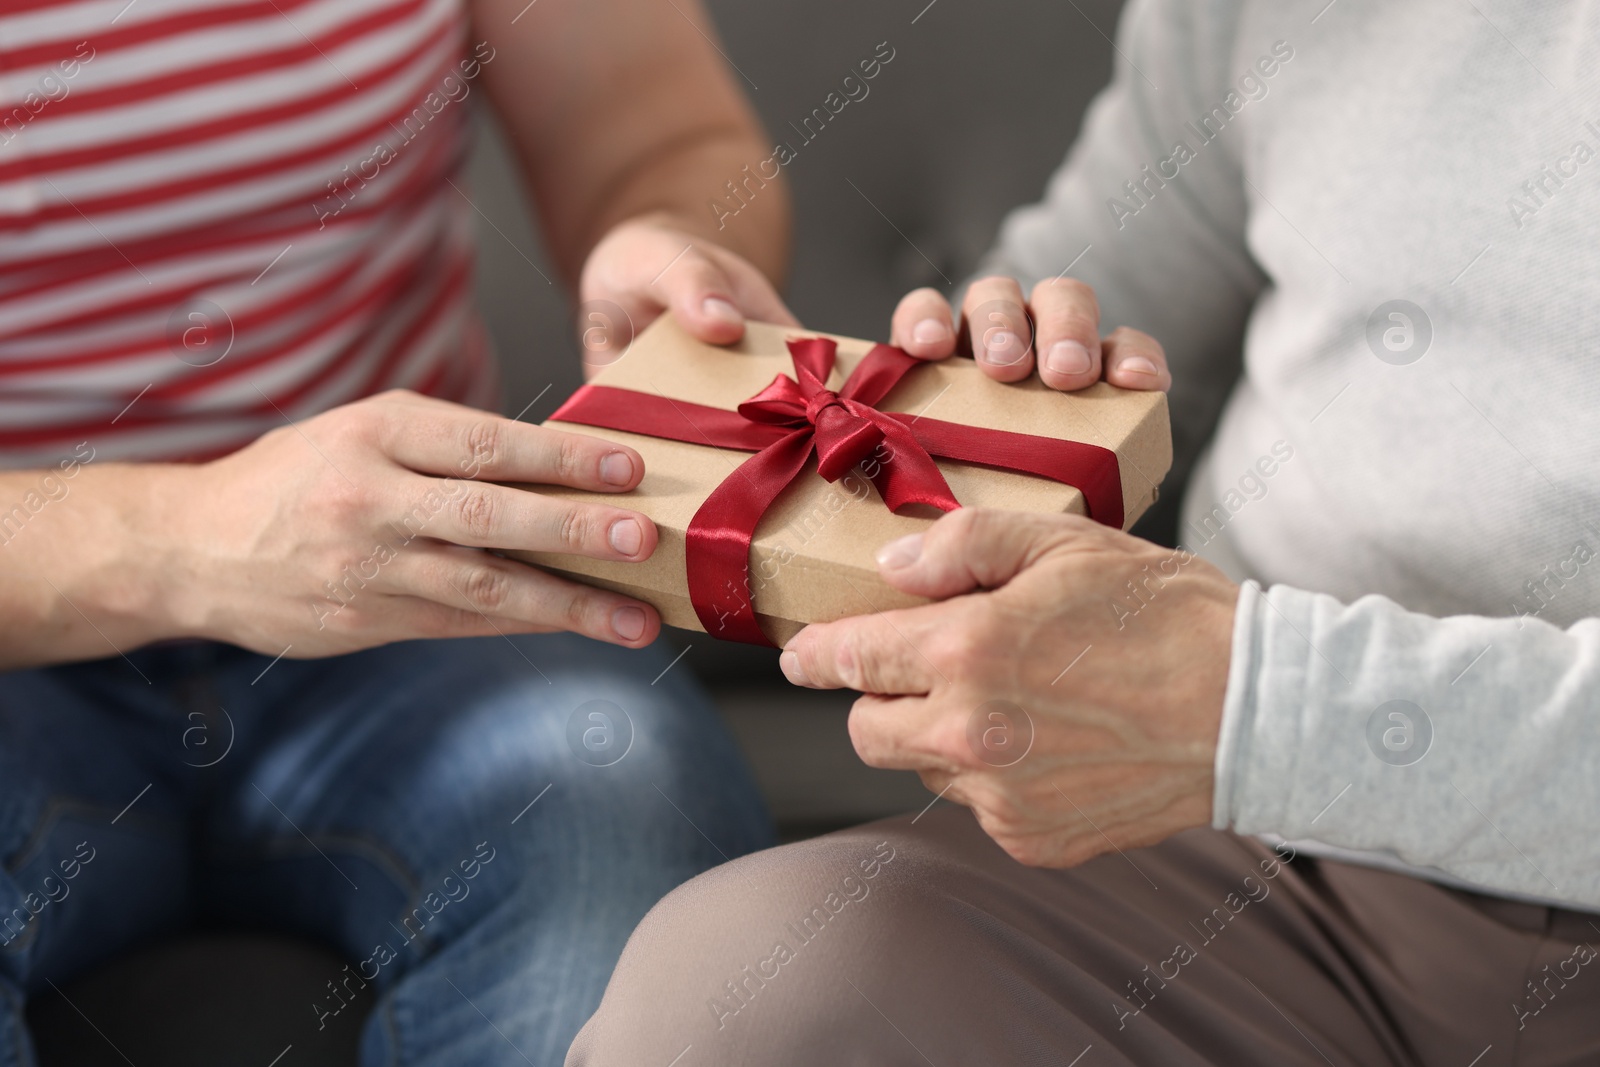 Photo of Son giving gift box to his dad on sofa, closeup